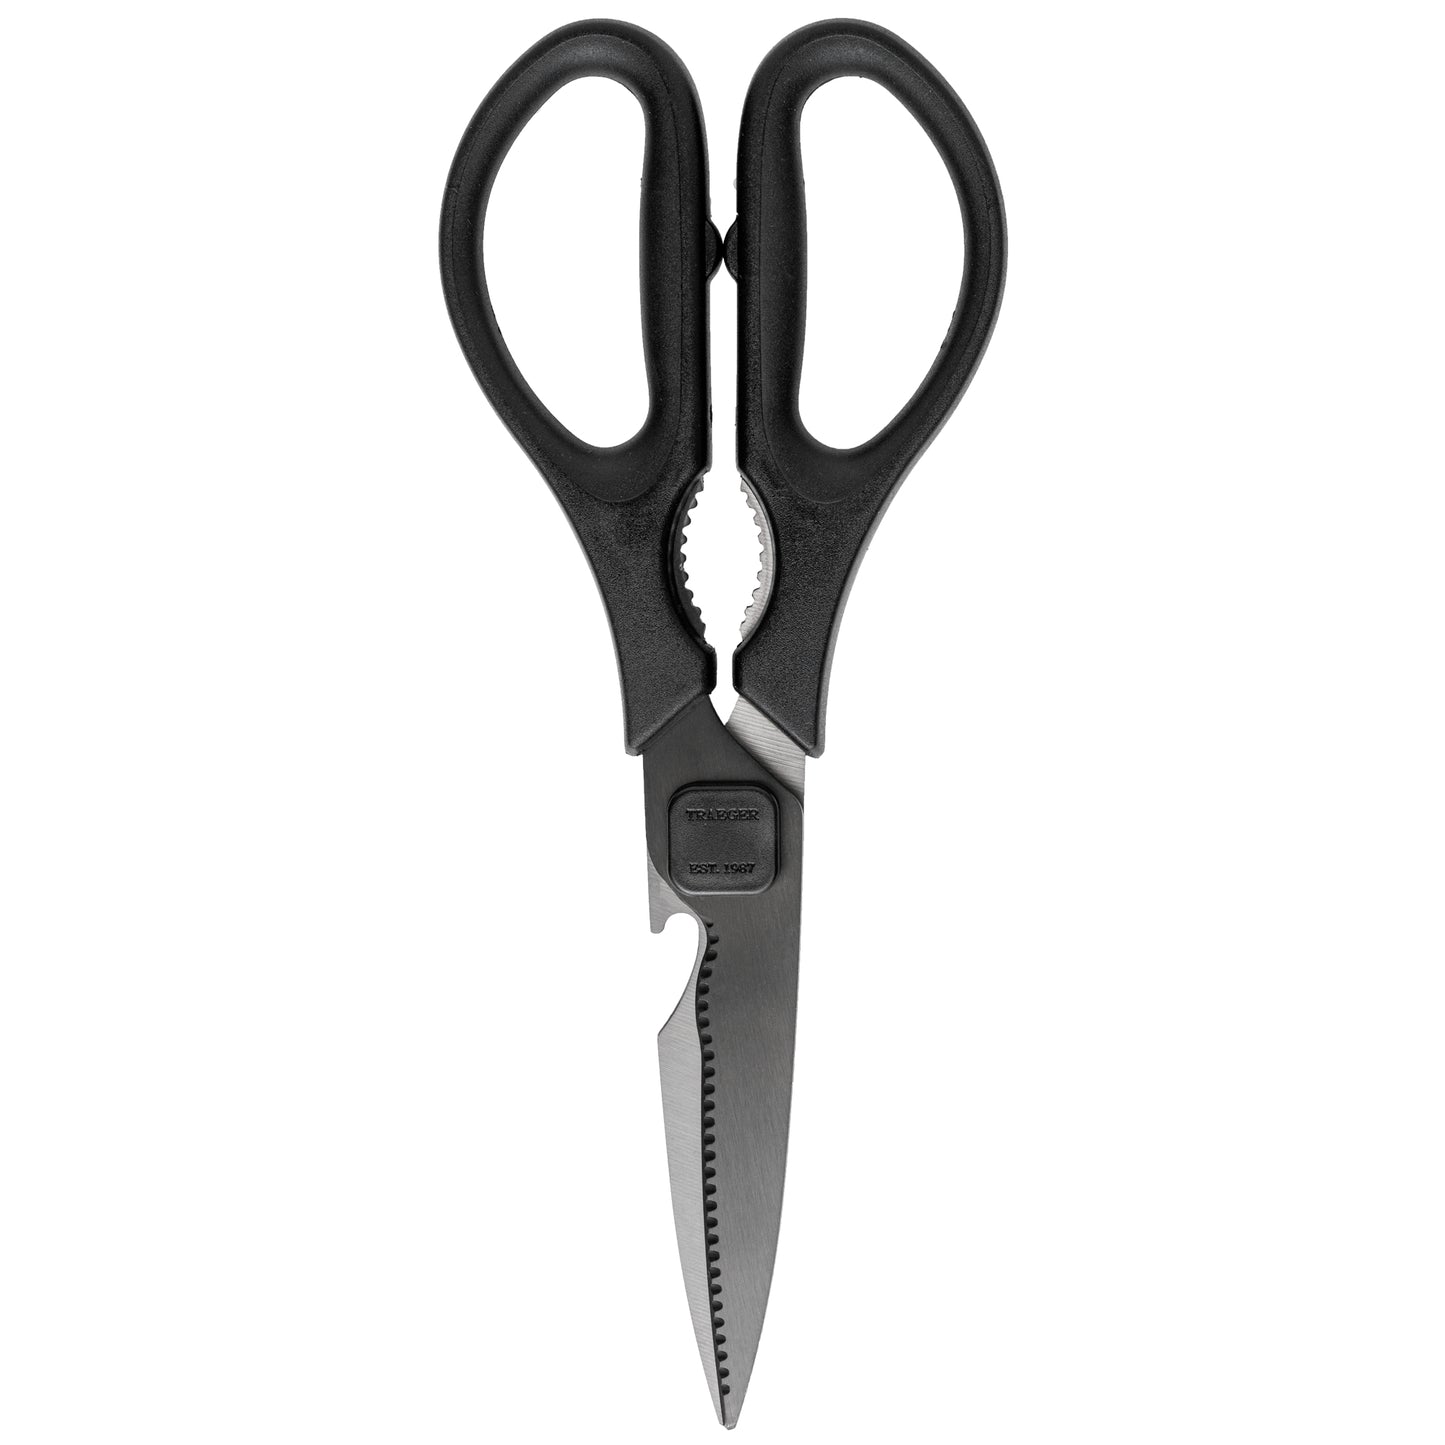 Traeger accessories - BBQ Shears - Easy to clean